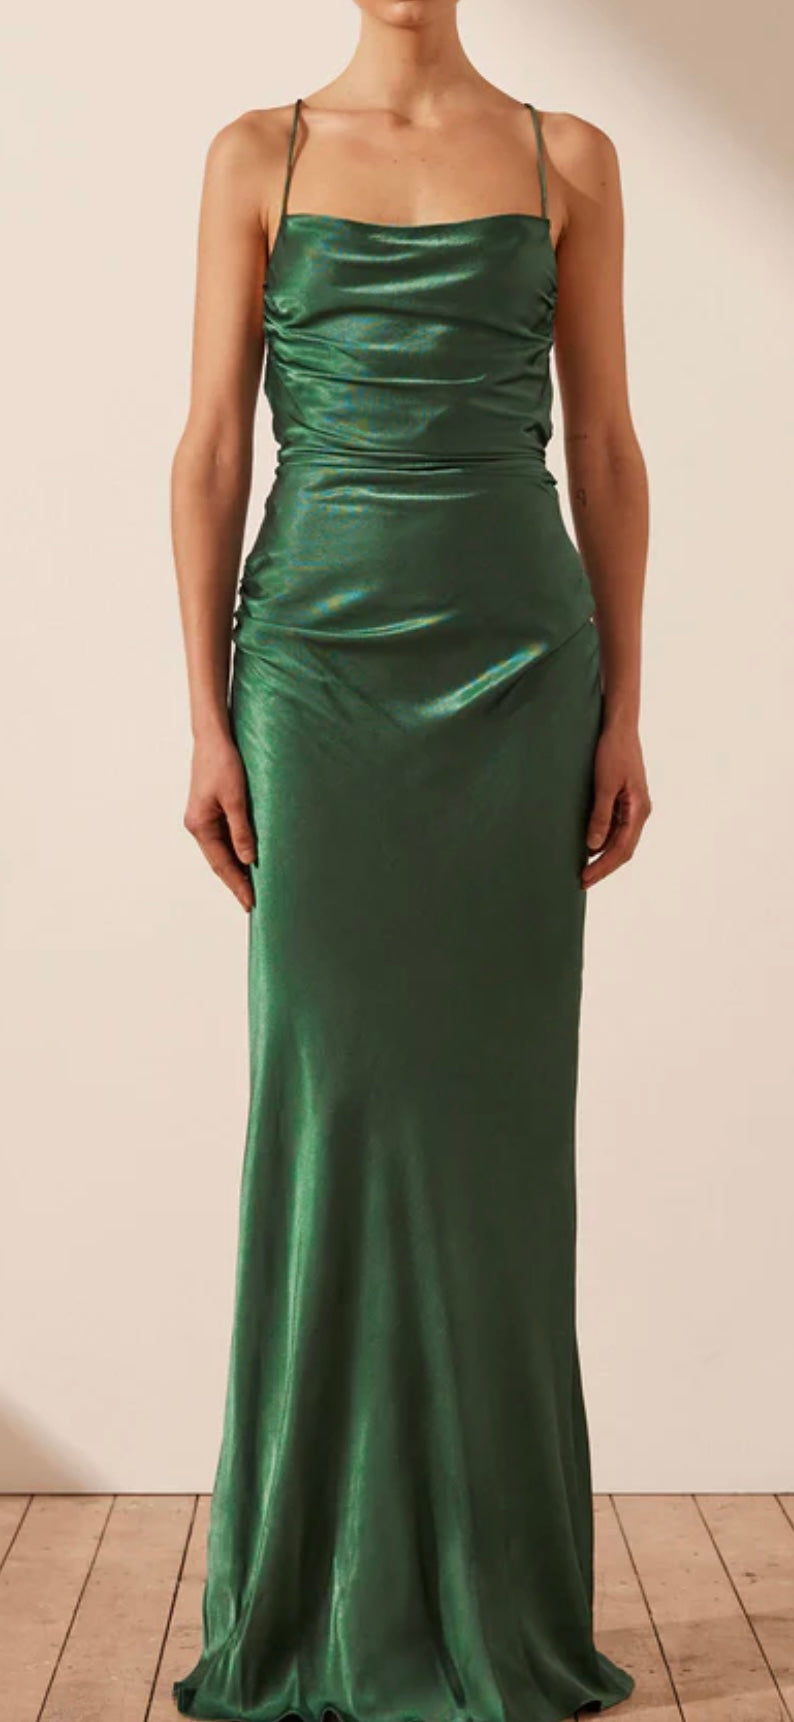 Shona Joy Angelica Maxi Dress in Basil Green front view with floor boards and white wall